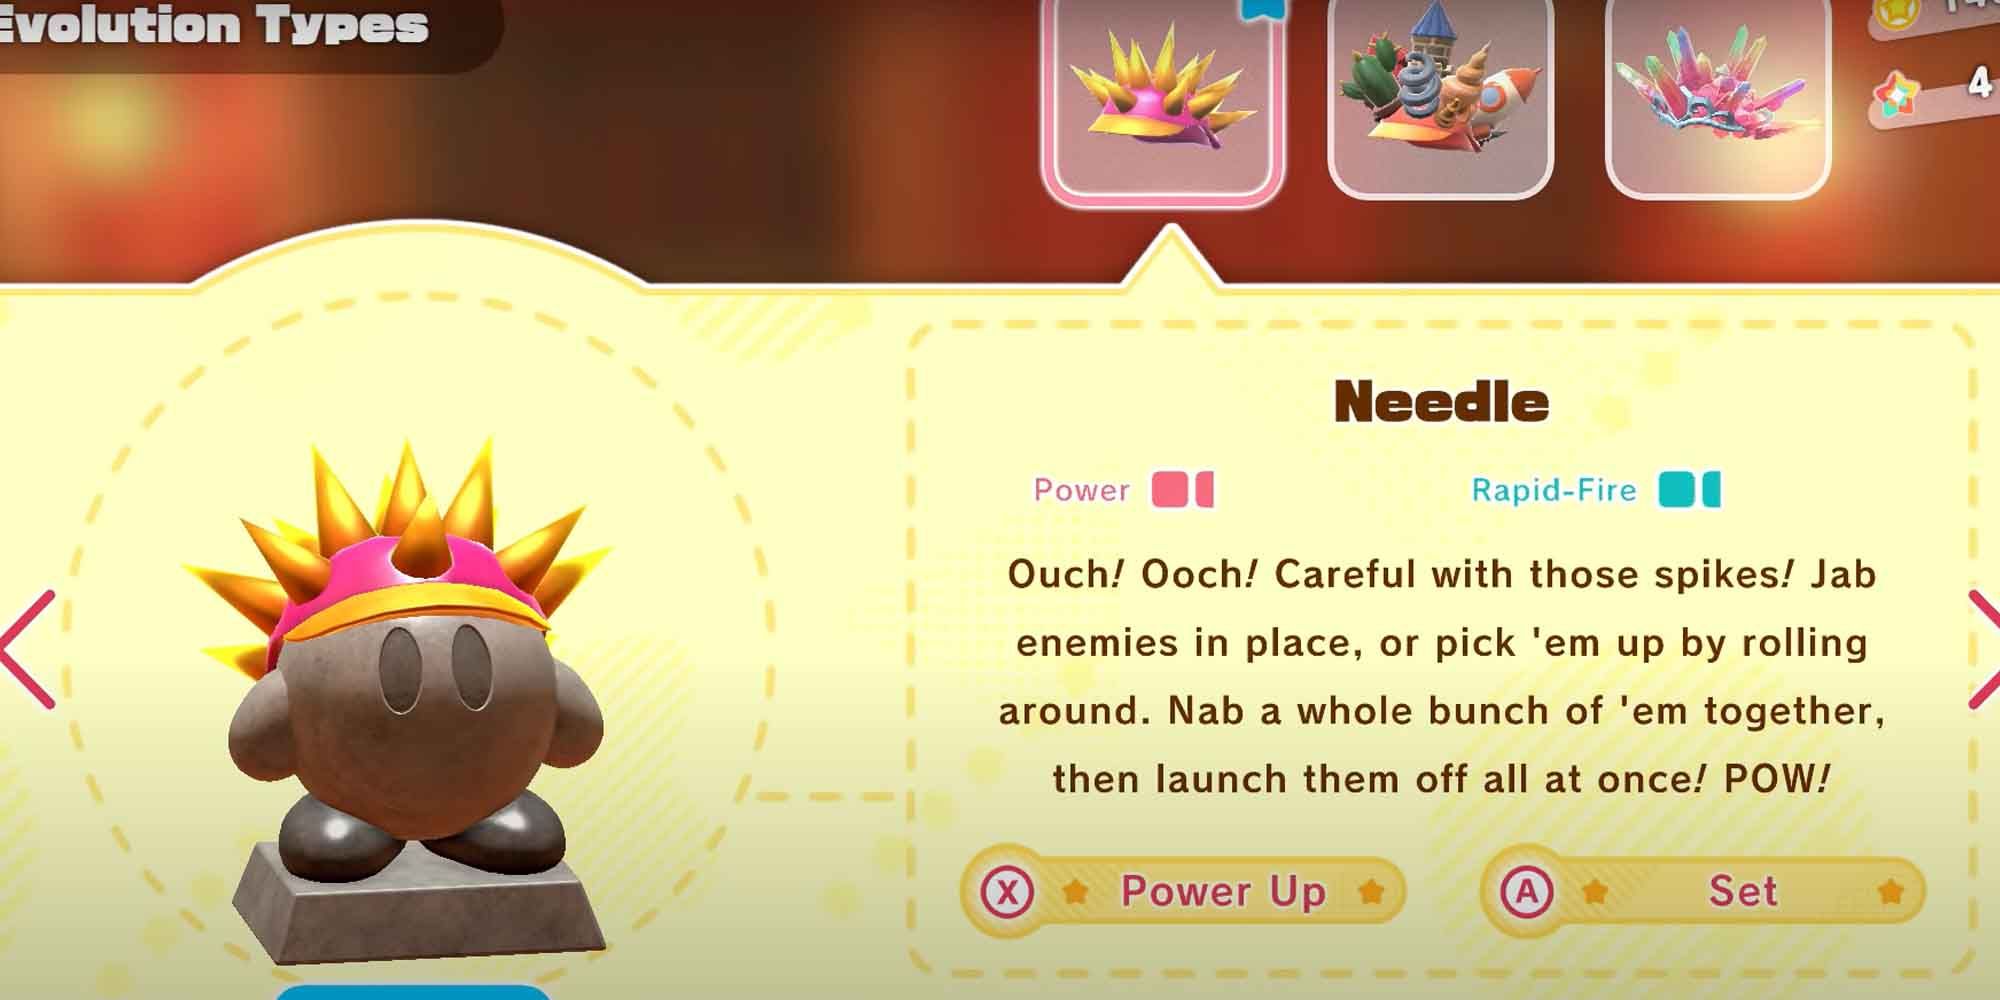 The Needle copy ability in Kirby in The Forgotten Land